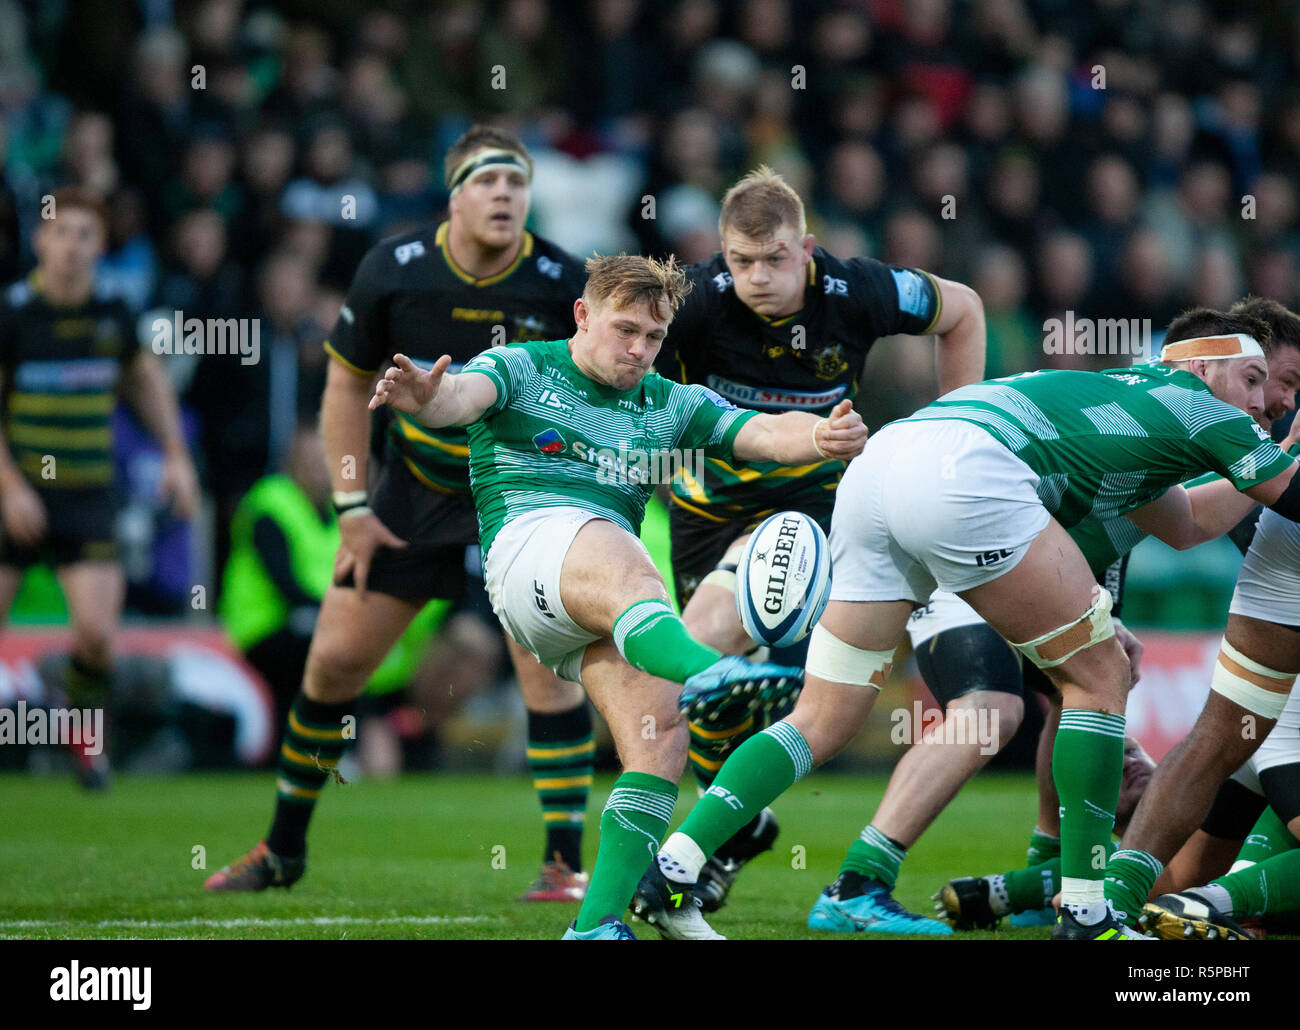 Northampton, UK. 1st December 2018. Sam Stuart of Newcastle Falcons kicks the ball during the Gallagher Premiership Rugby match between Northampton Saints and Newcastle Falcons. Andrew Taylor/Alamy Live News Stock Photo